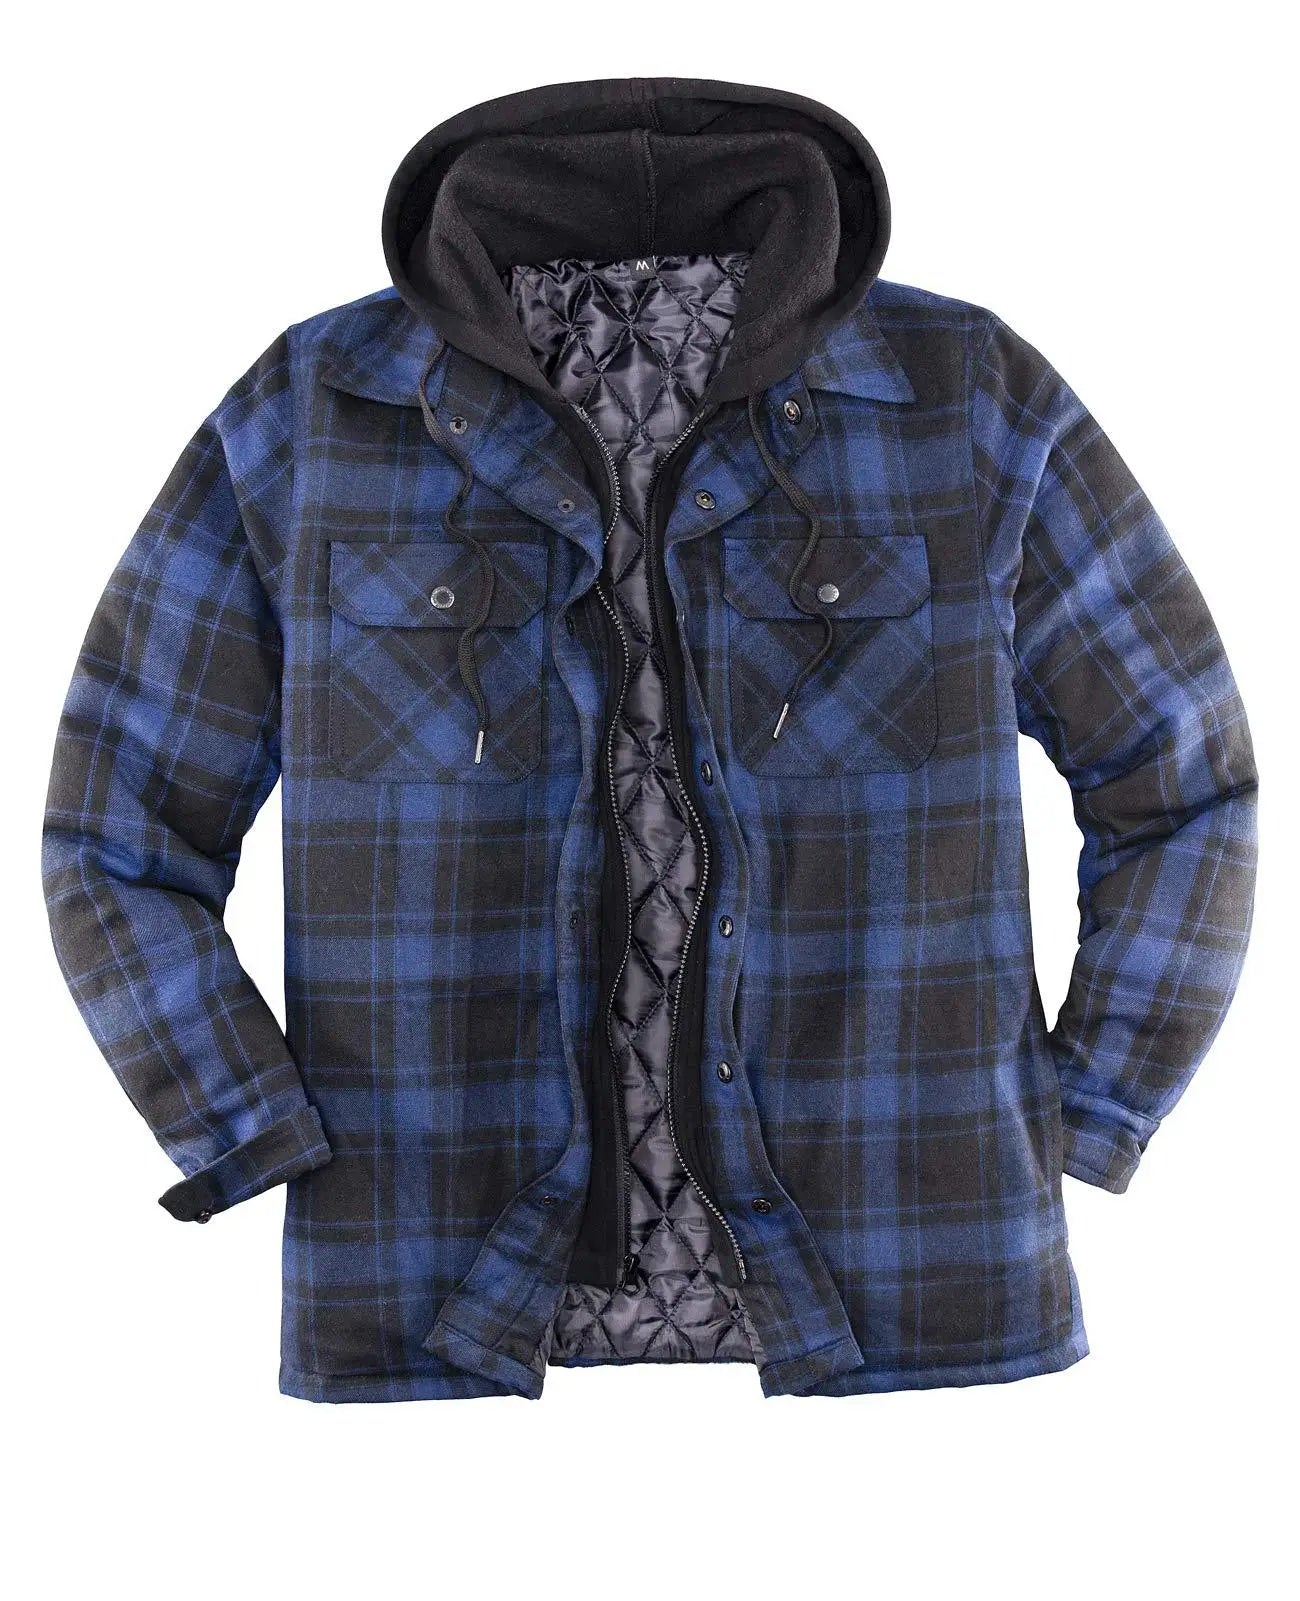 Thick Cotton Plaid Long Sleeved Loose Hooded Jacket